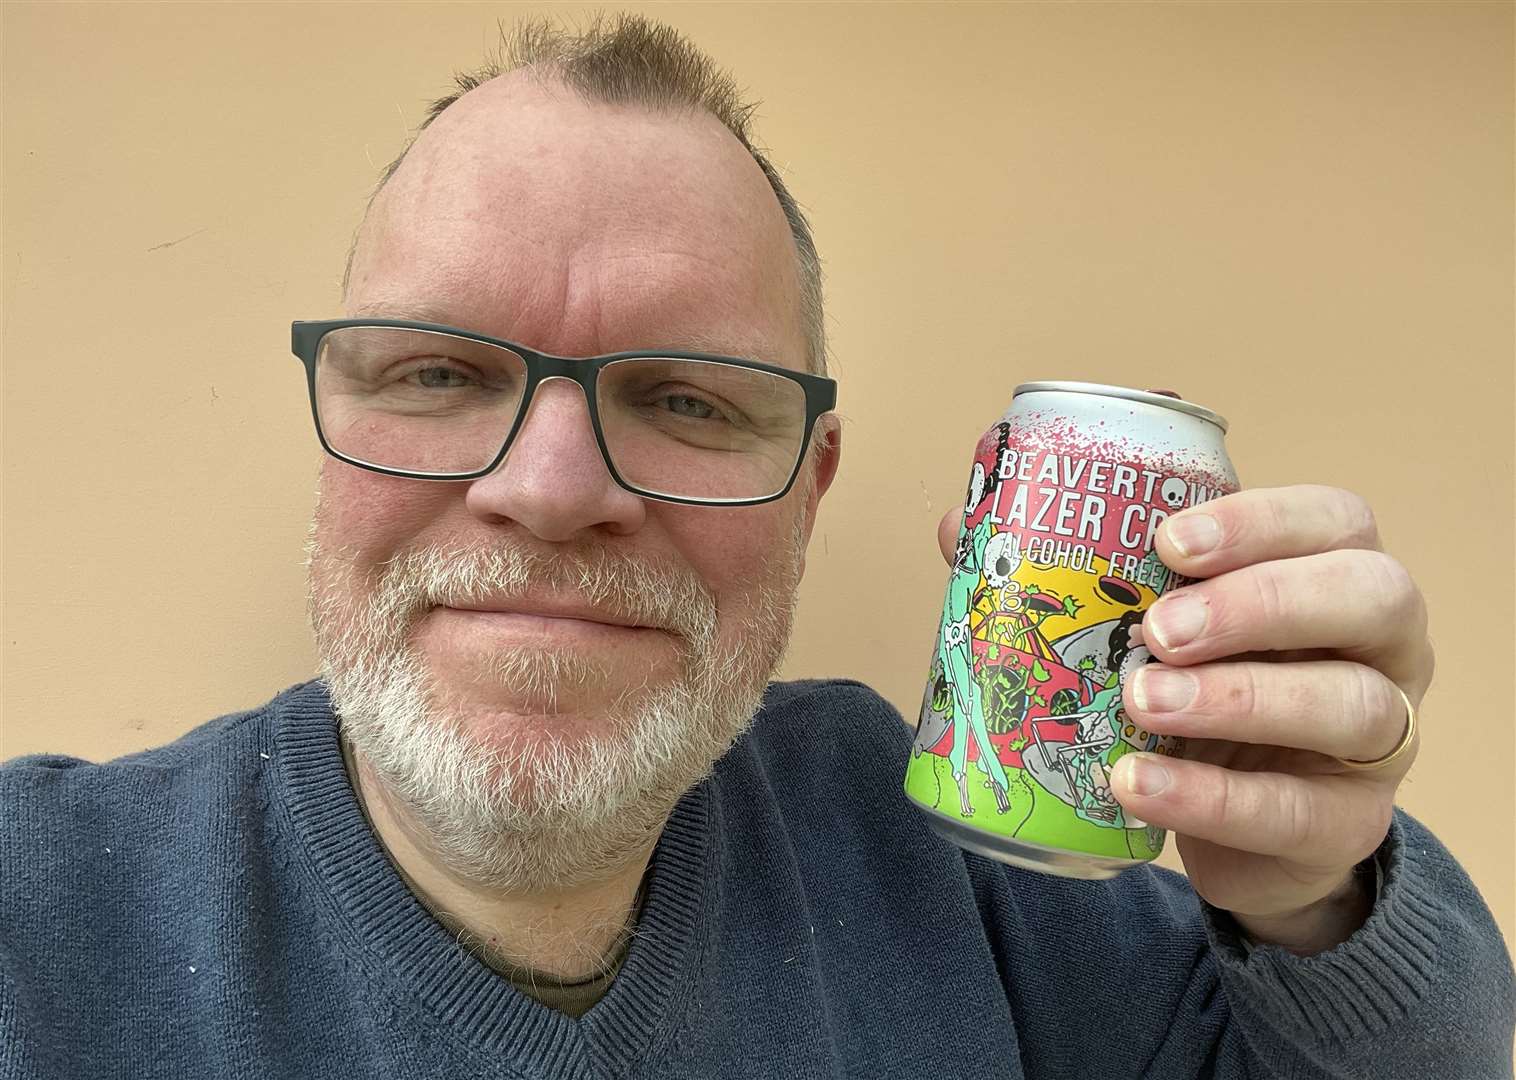 And the winner is...our reporter with Beavertown's Lazer Crush